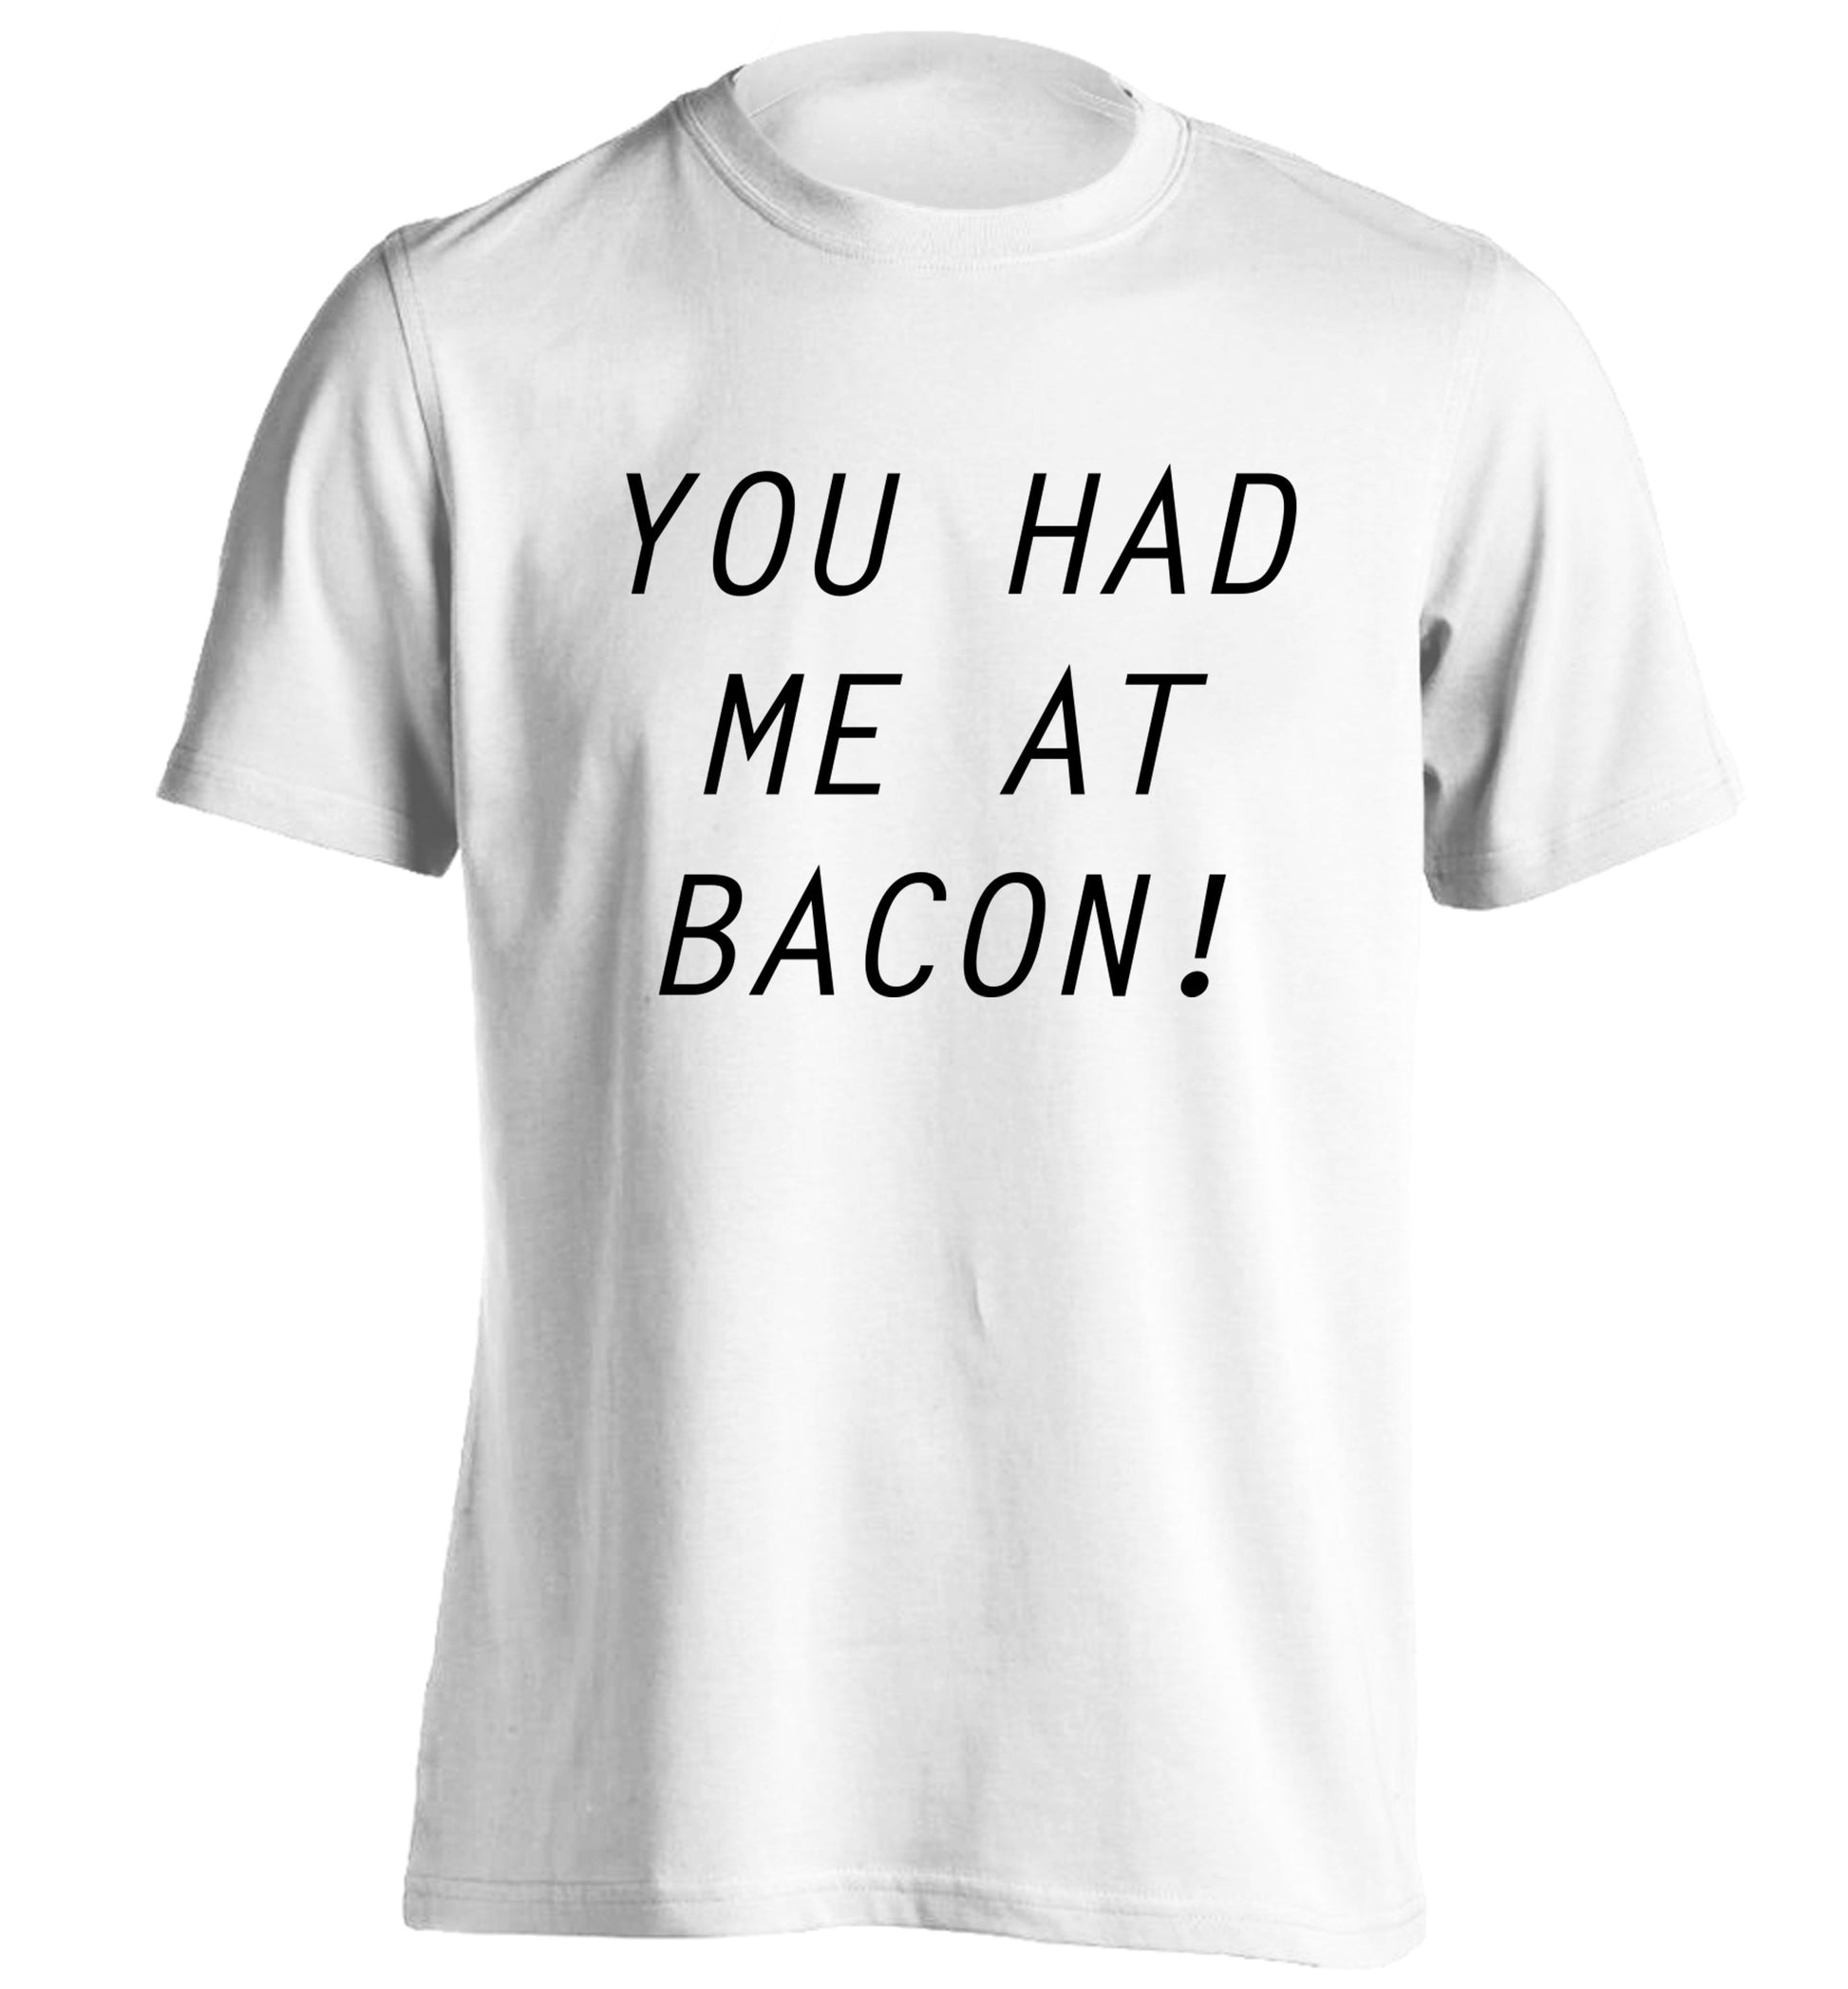 You had me at bacon adults unisex white Tshirt 2XL